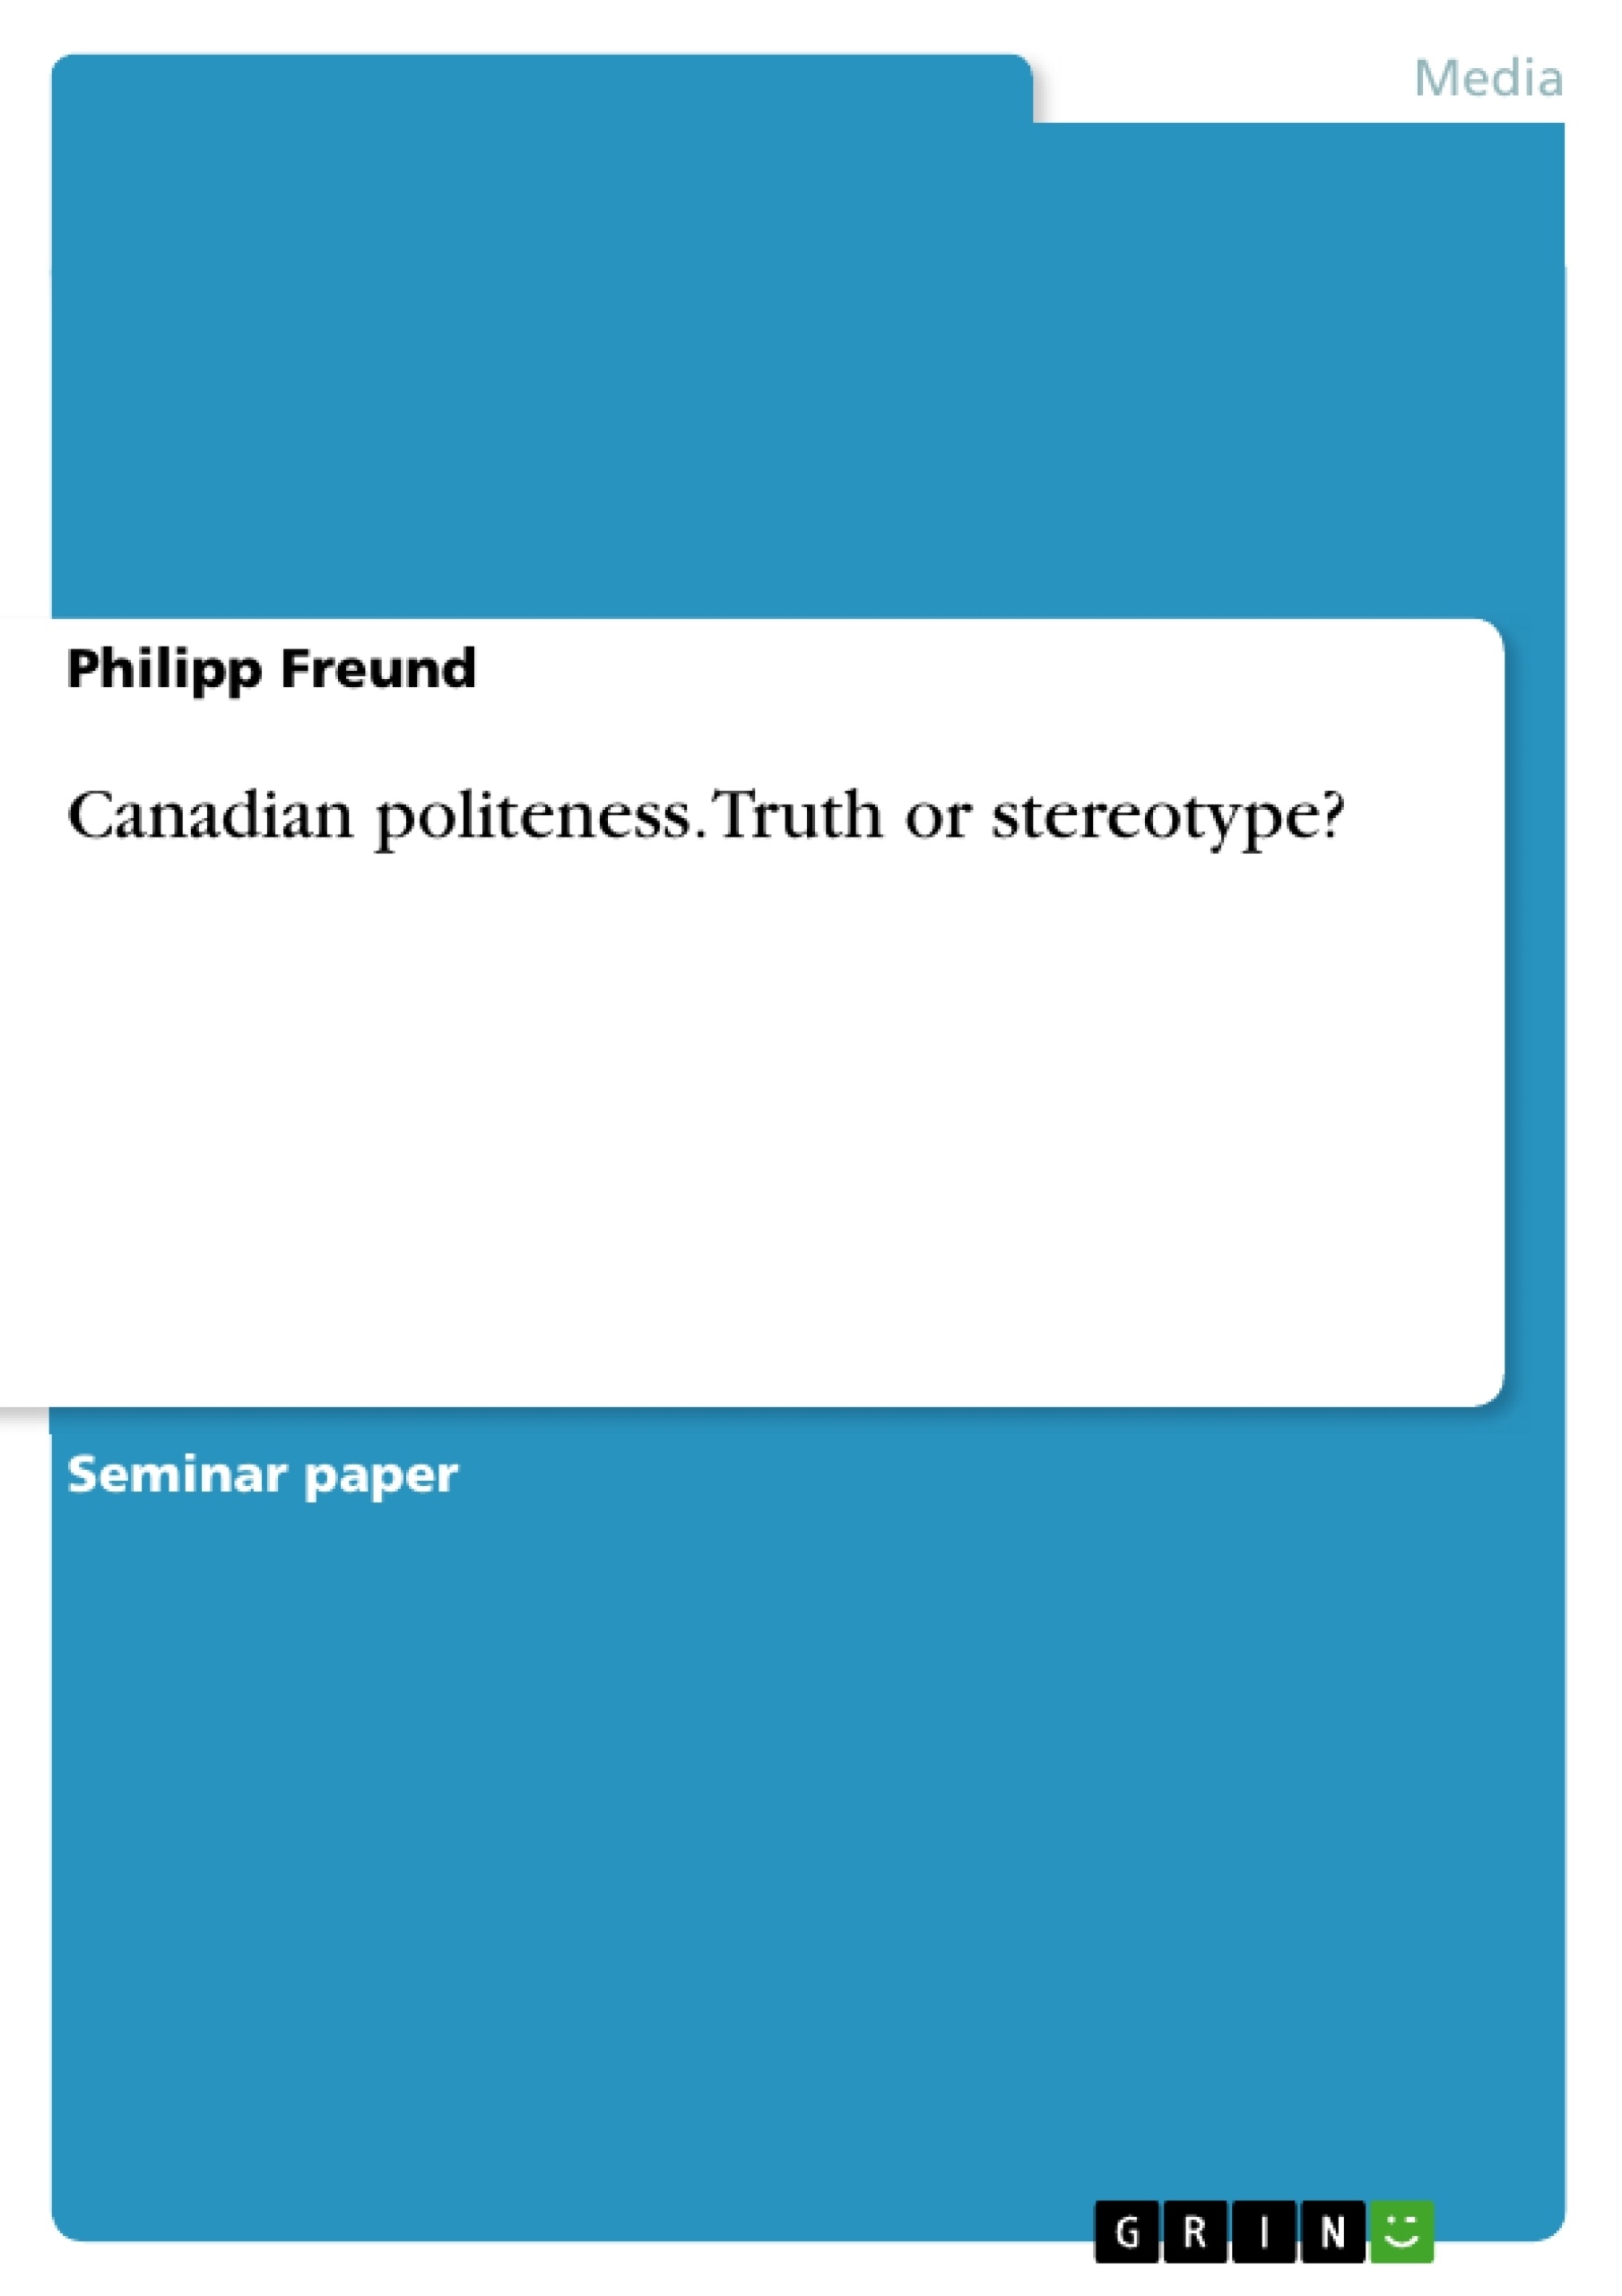 Title: Canadian politeness. Truth or stereotype?